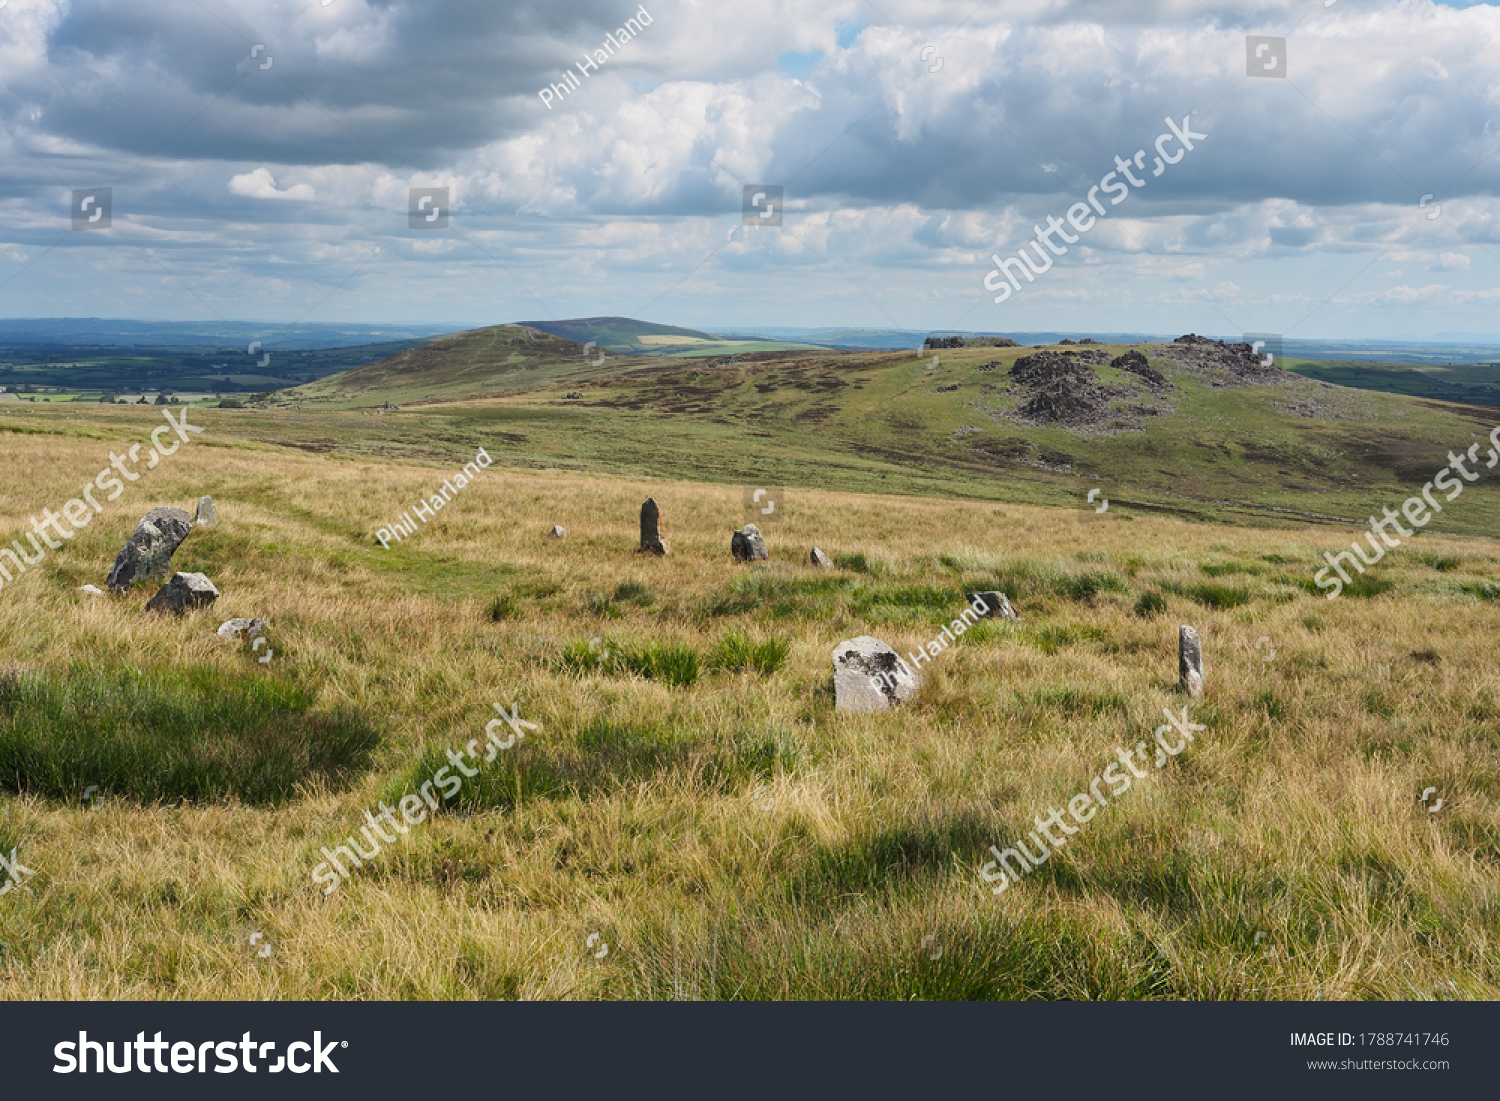 Stone circle of Bed Arthur, the grave of Arthur, just below the summit of Carn Bica, Preseli Hills, Pembrokeshire Coast National Park, Wales, UK #1788741746